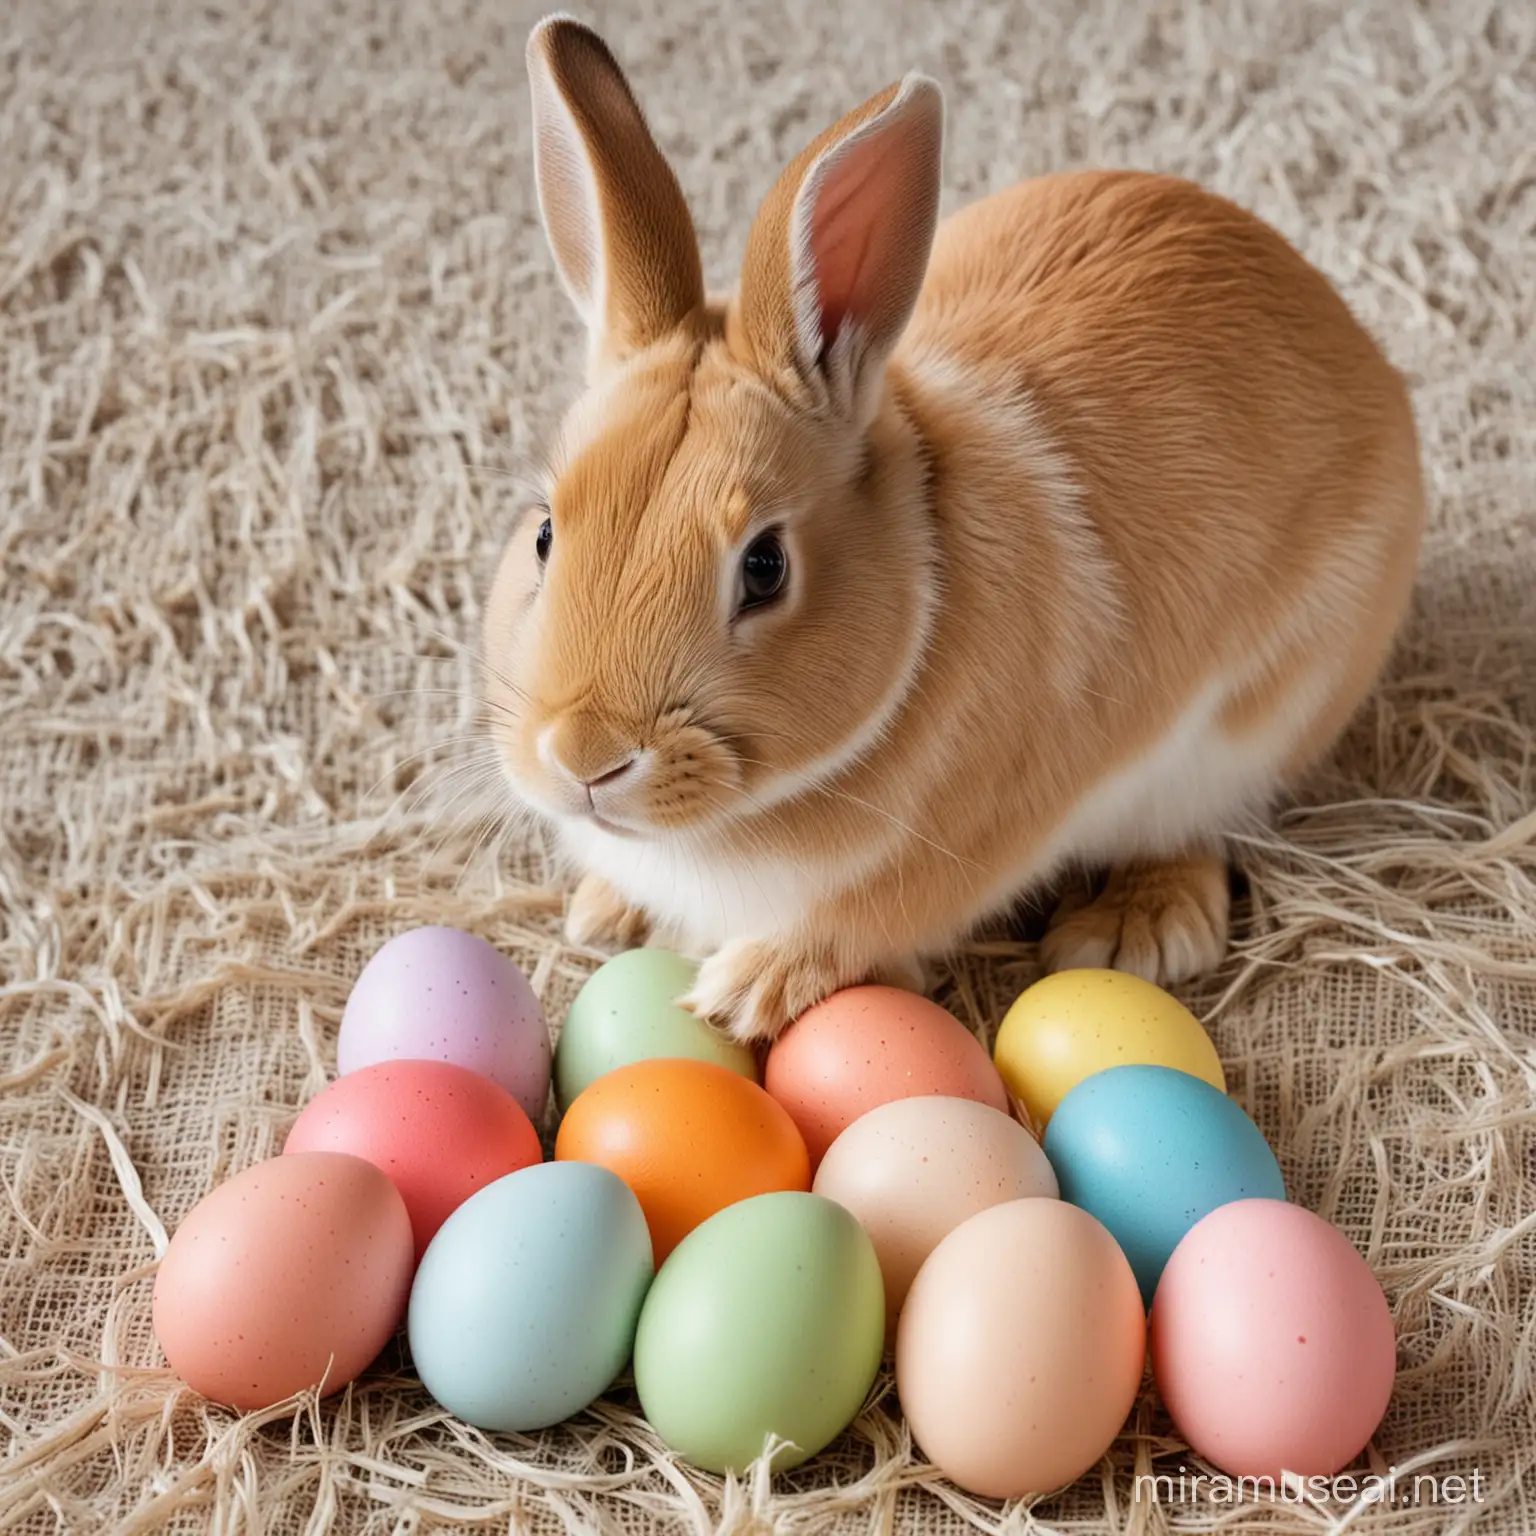 i need a easter rabbit with colored eggs
